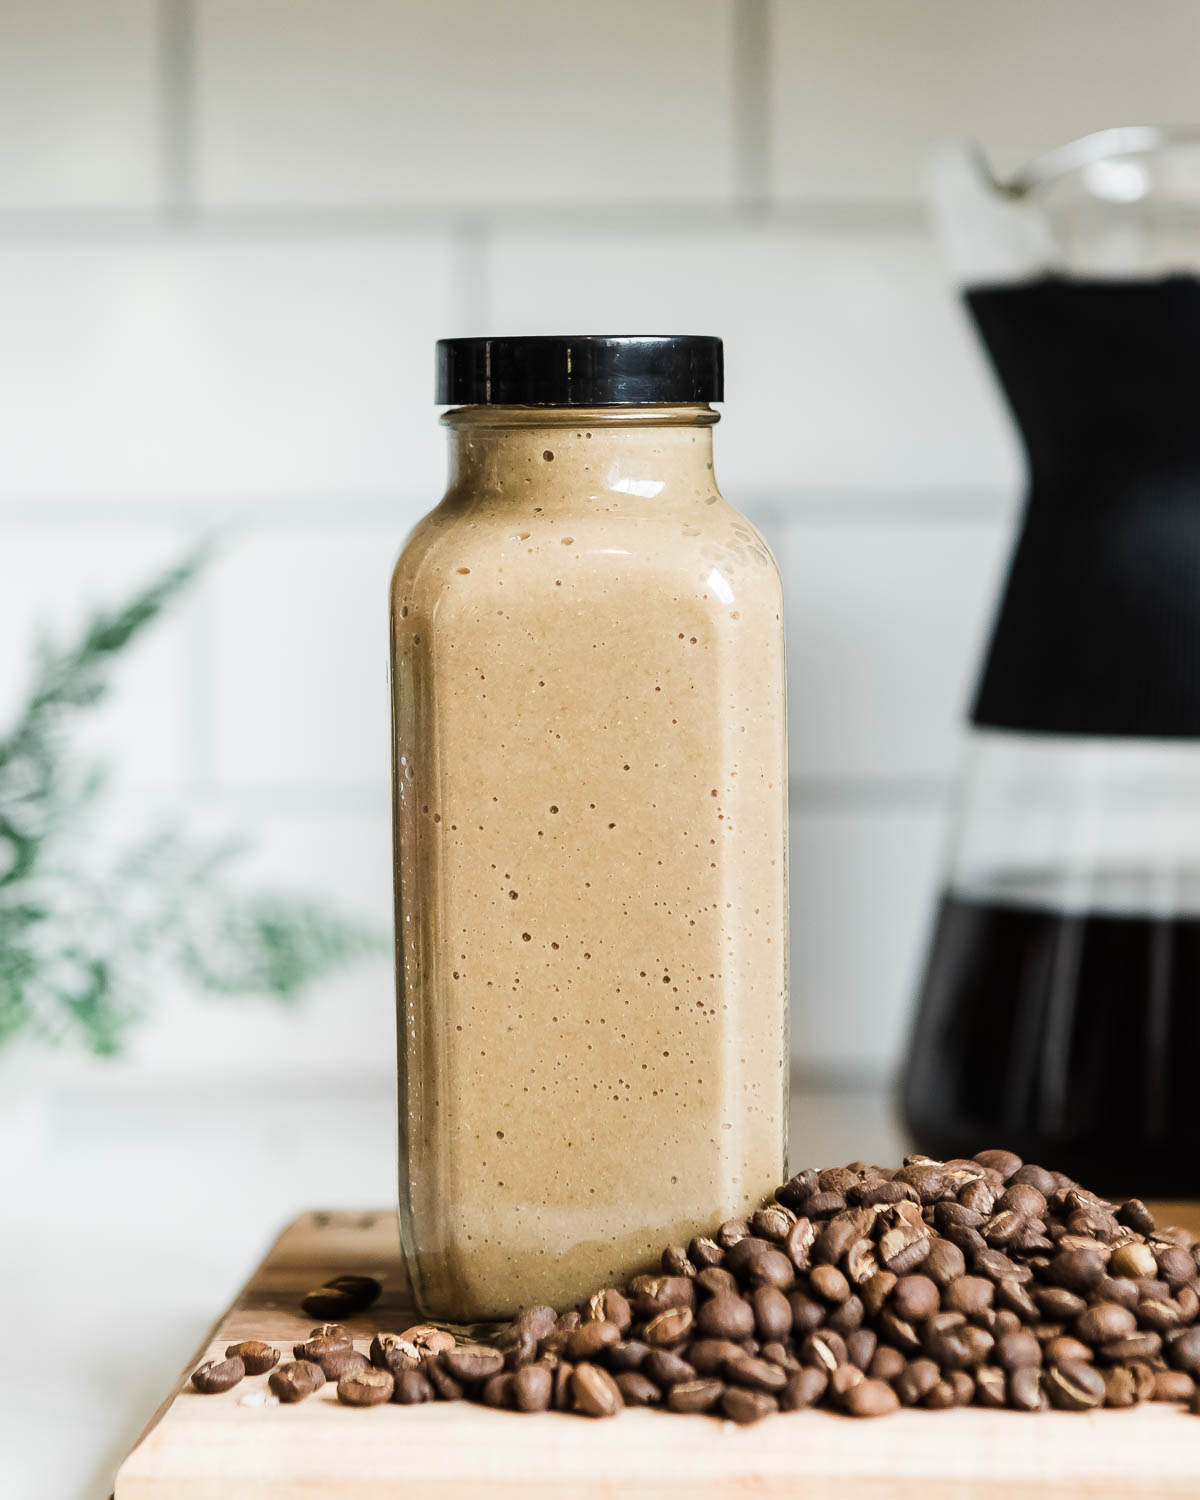 brown colored smoothie in a glass jar with a black lid sitting on a pile of whole coffee beans.